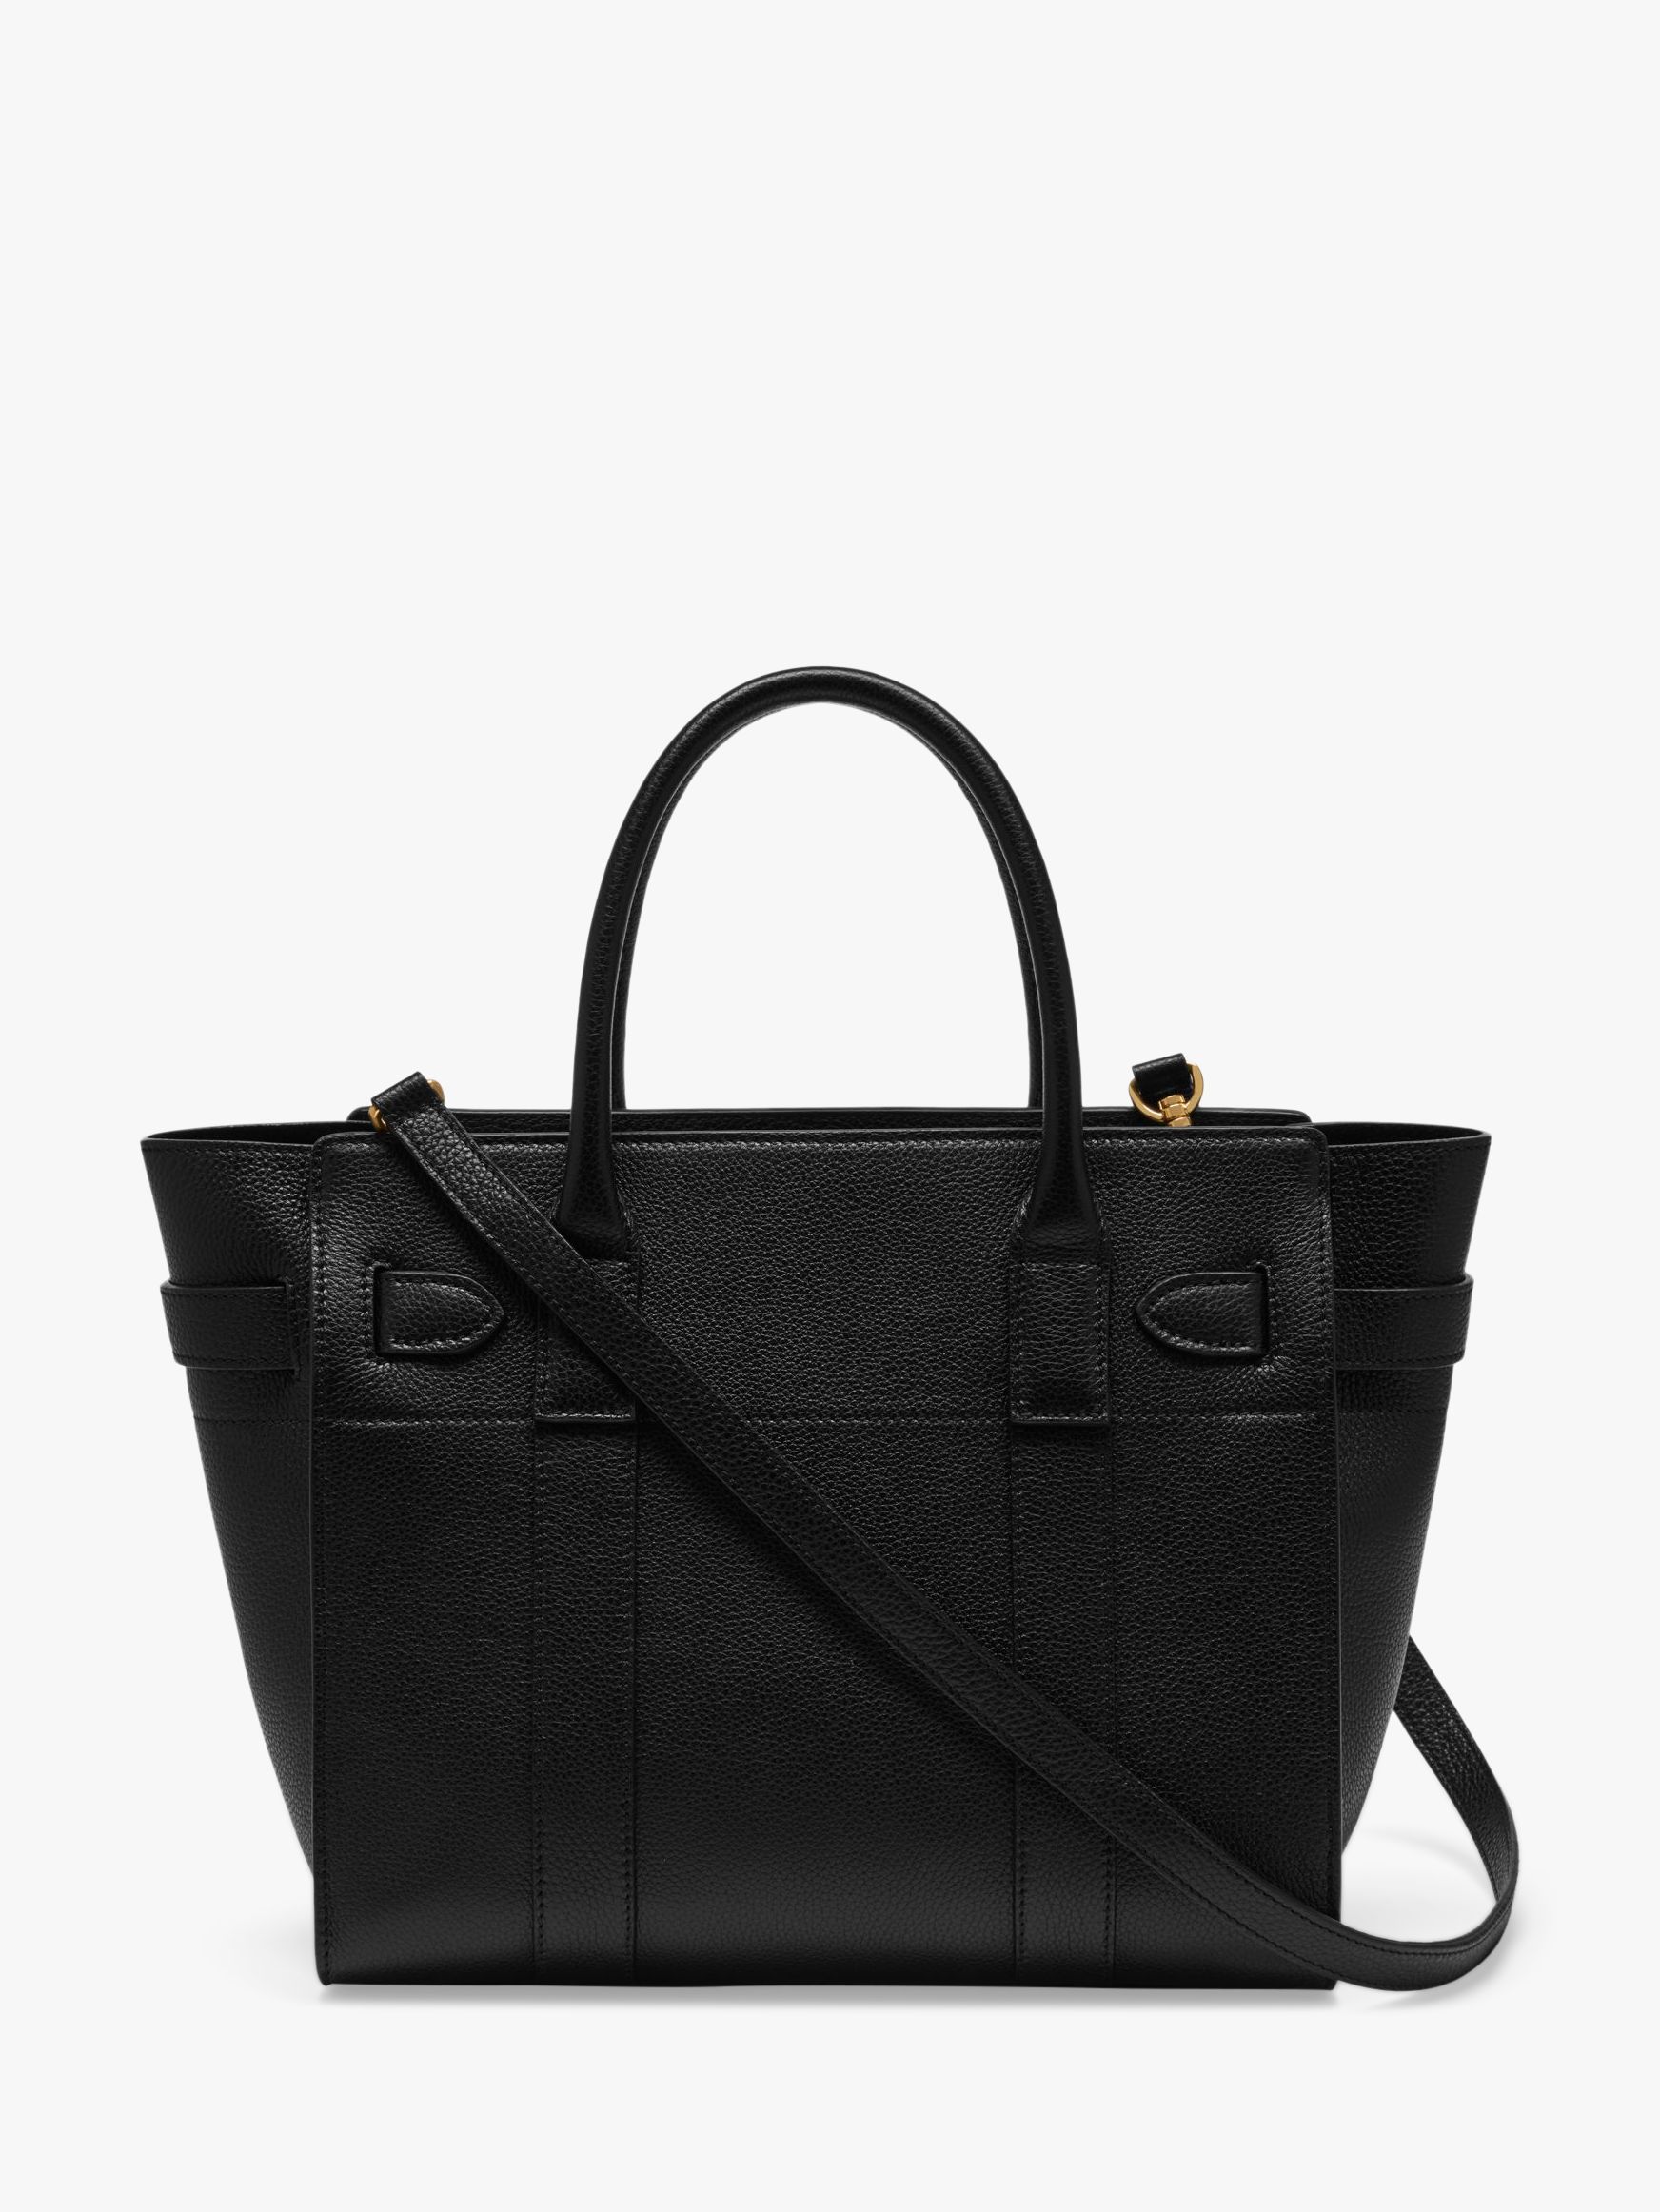 Mulberry Small Bayswater Zipped Classic Grain Leather Tote Bag, Black